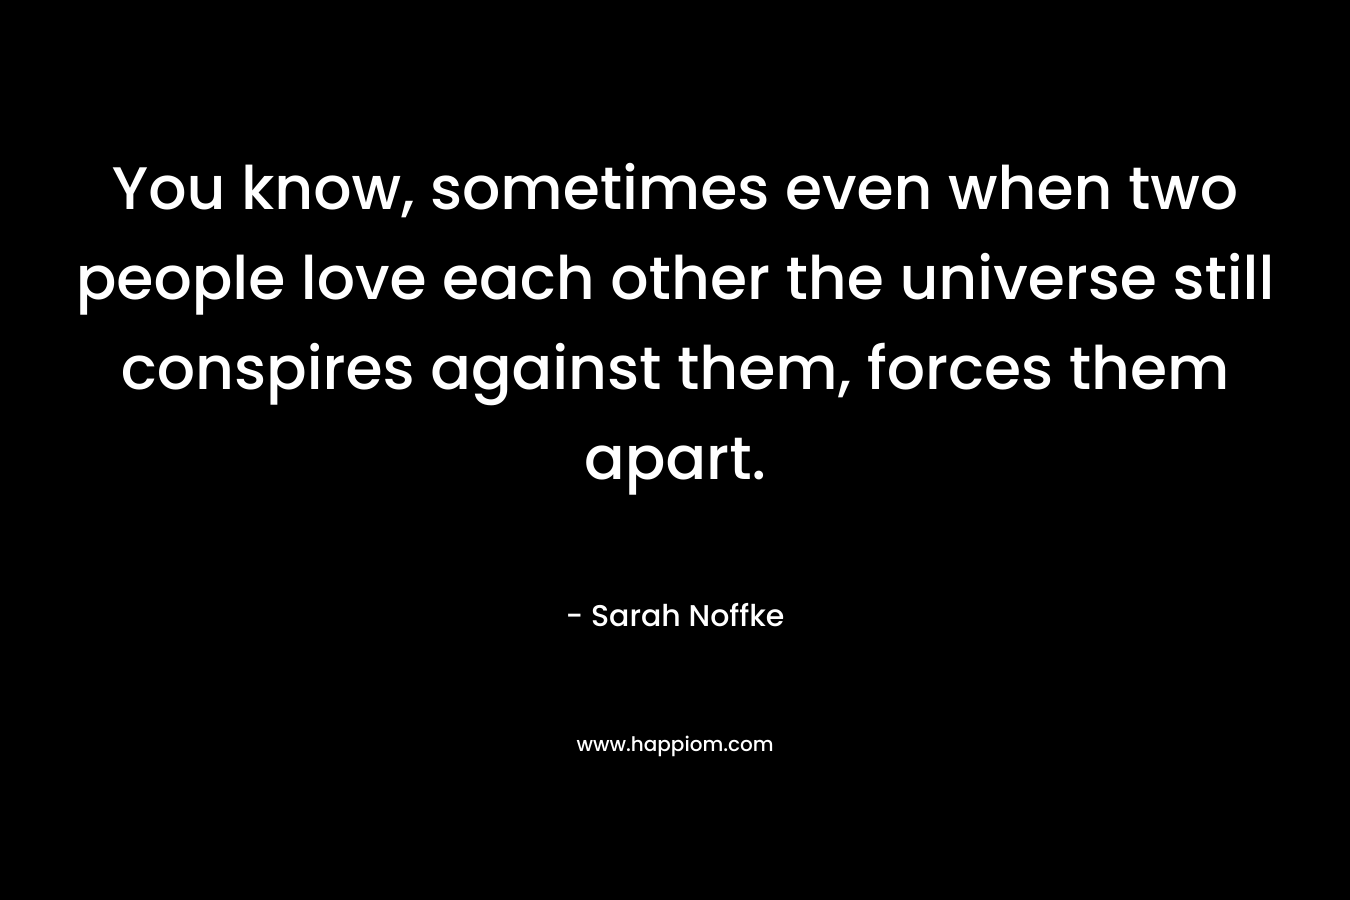 You know, sometimes even when two people love each other the universe still conspires against them, forces them apart.